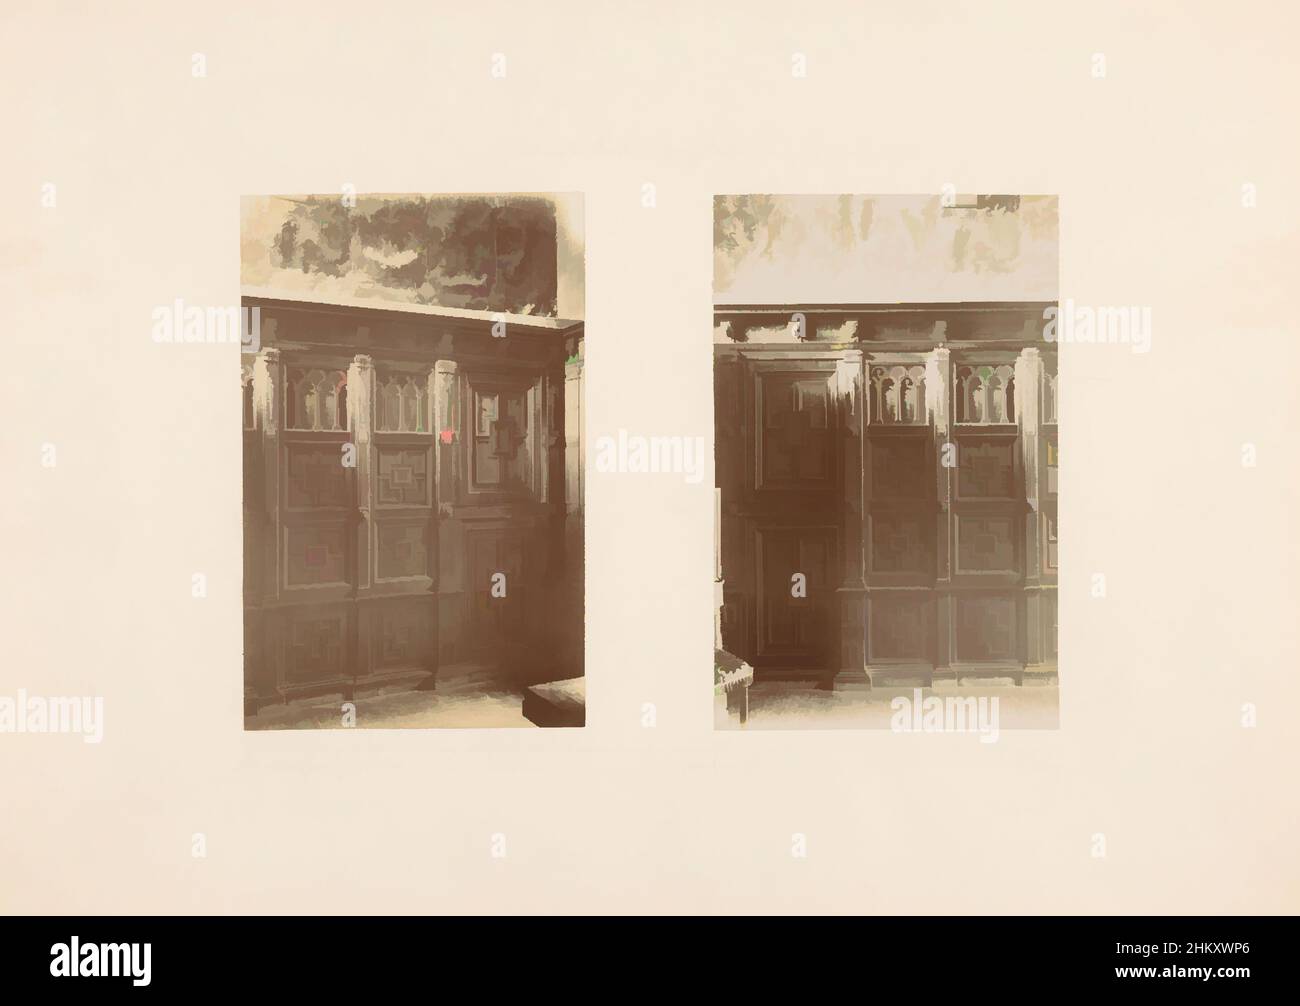 Art inspired by View of two views of a wall paneling, On the left the wall paneling, seen from the side, on the right a front view of the wall paneling., Netherlands, c. 1875 - c. 1900, cardboard, photographic support, height 315 mm × width 446 mm, Classic works modernized by Artotop with a splash of modernity. Shapes, color and value, eye-catching visual impact on art. Emotions through freedom of artworks in a contemporary way. A timeless message pursuing a wildly creative new direction. Artists turning to the digital medium and creating the Artotop NFT Stock Photo